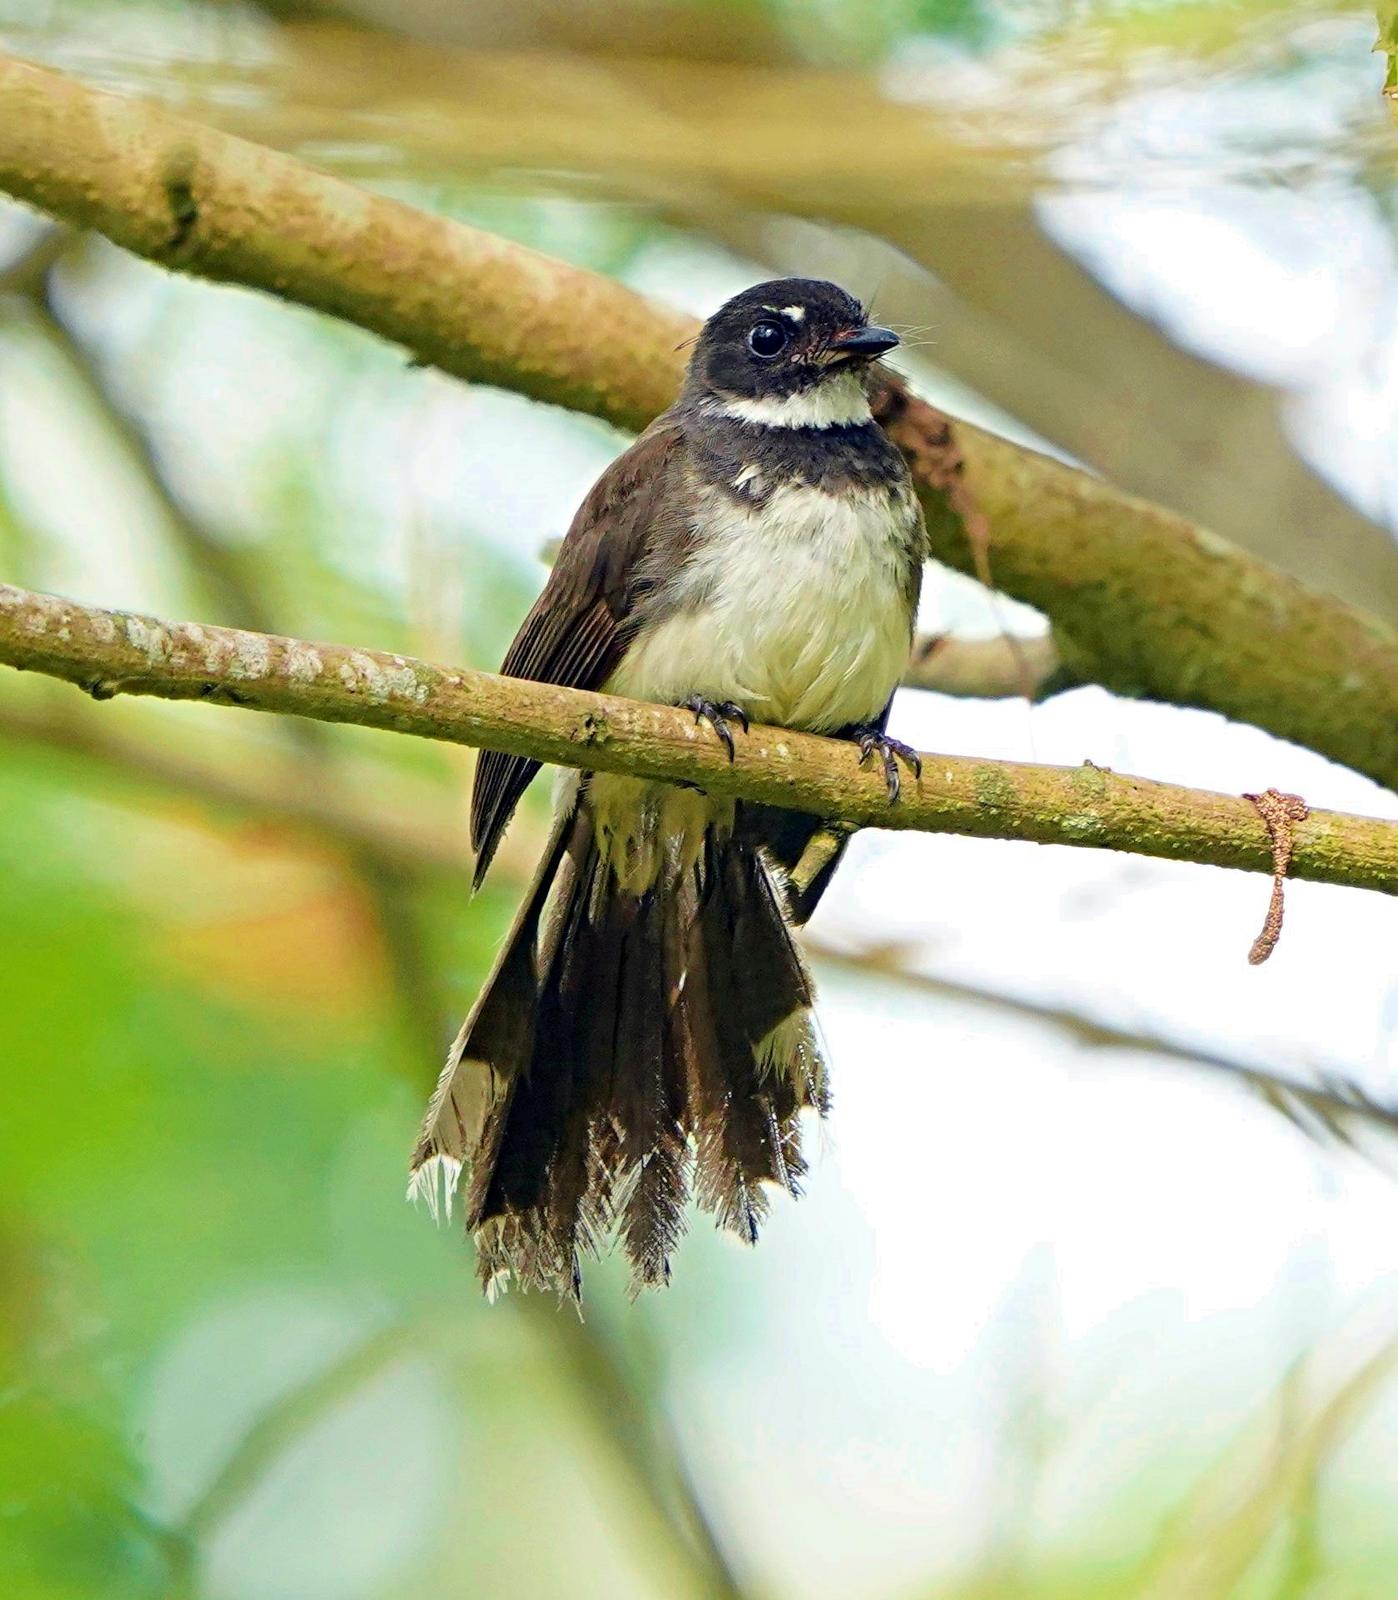 Malaysian Pied-Fantail Photo by Steven Cheong